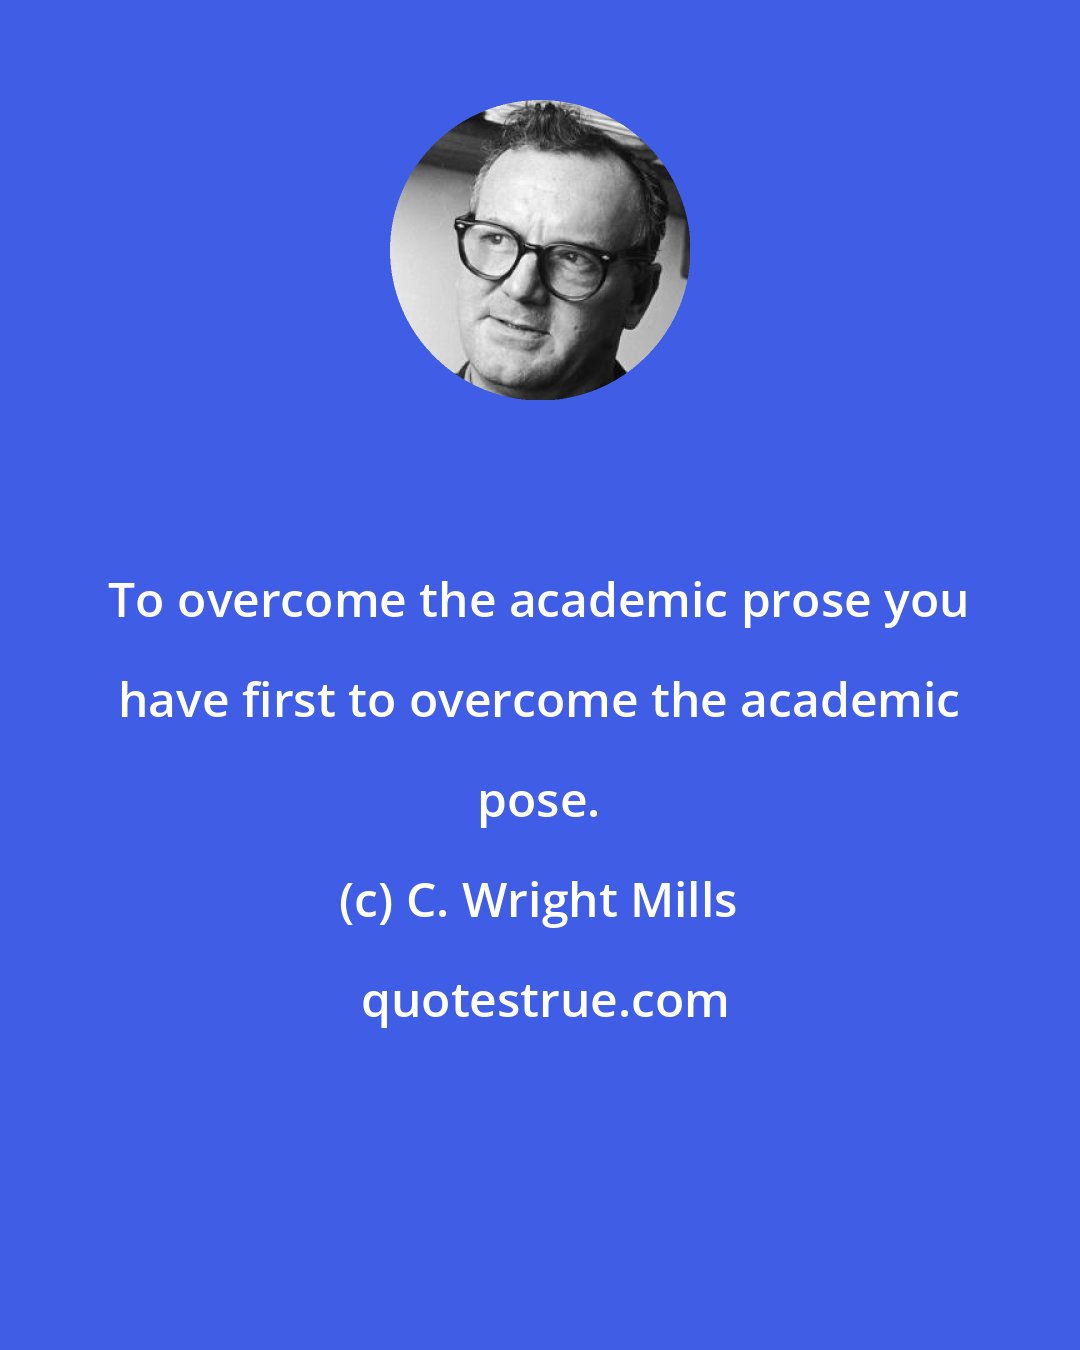 C. Wright Mills: To overcome the academic prose you have first to overcome the academic pose.